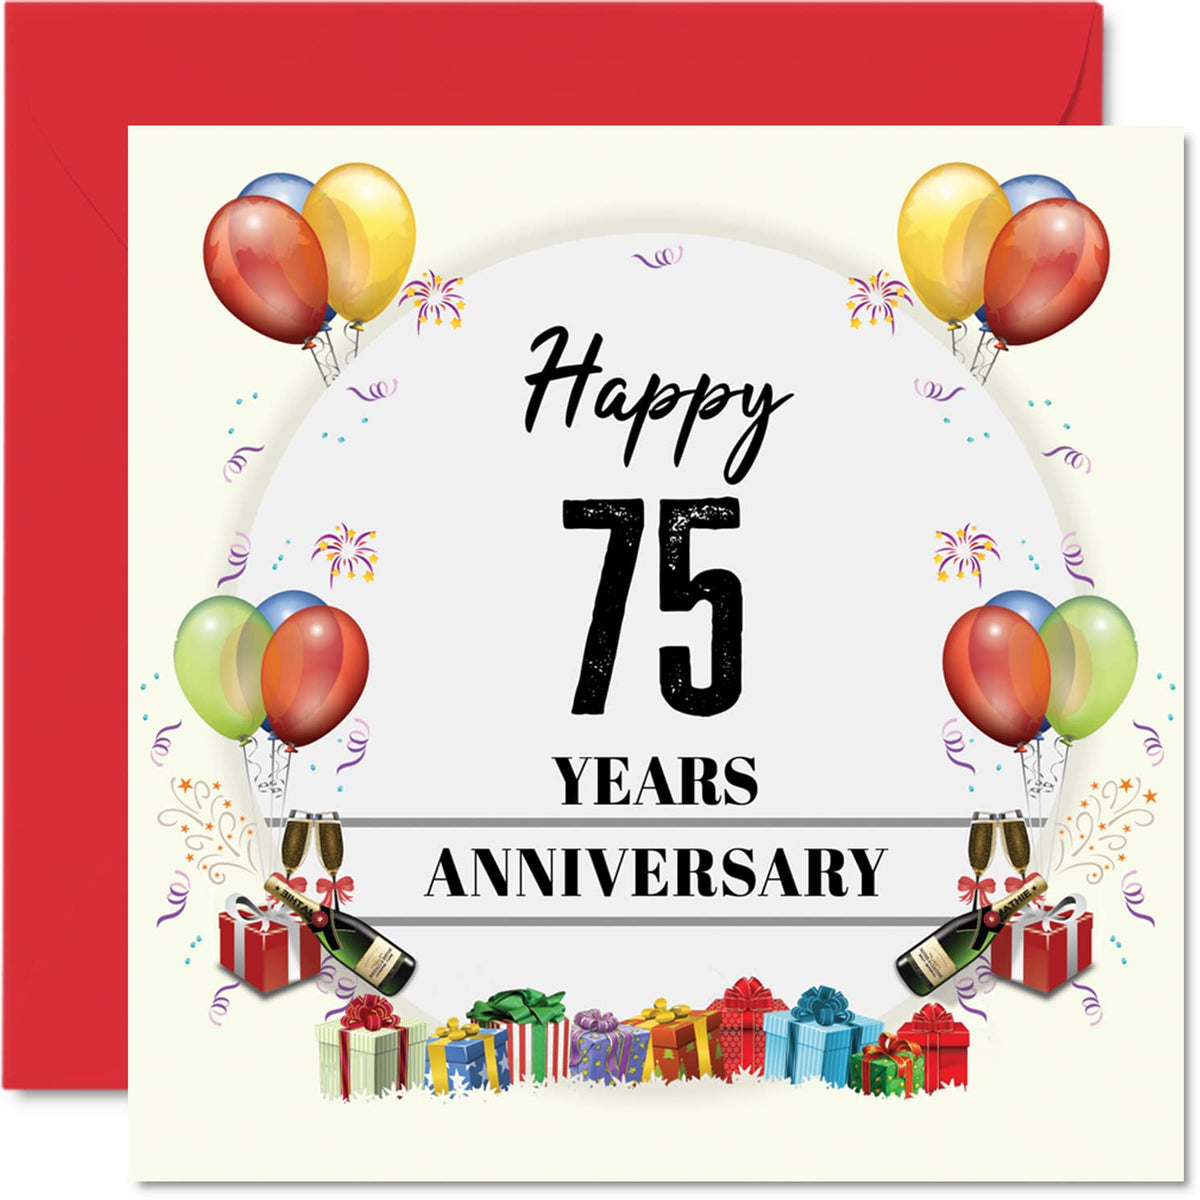 75th Anniversary Card for Husband Wife - Anniversary Party - Happy 75th Wedding Anniversary Card for Partner, 145mm x 145mm Greeting Cards for Seventy-Fifth Anniversaries